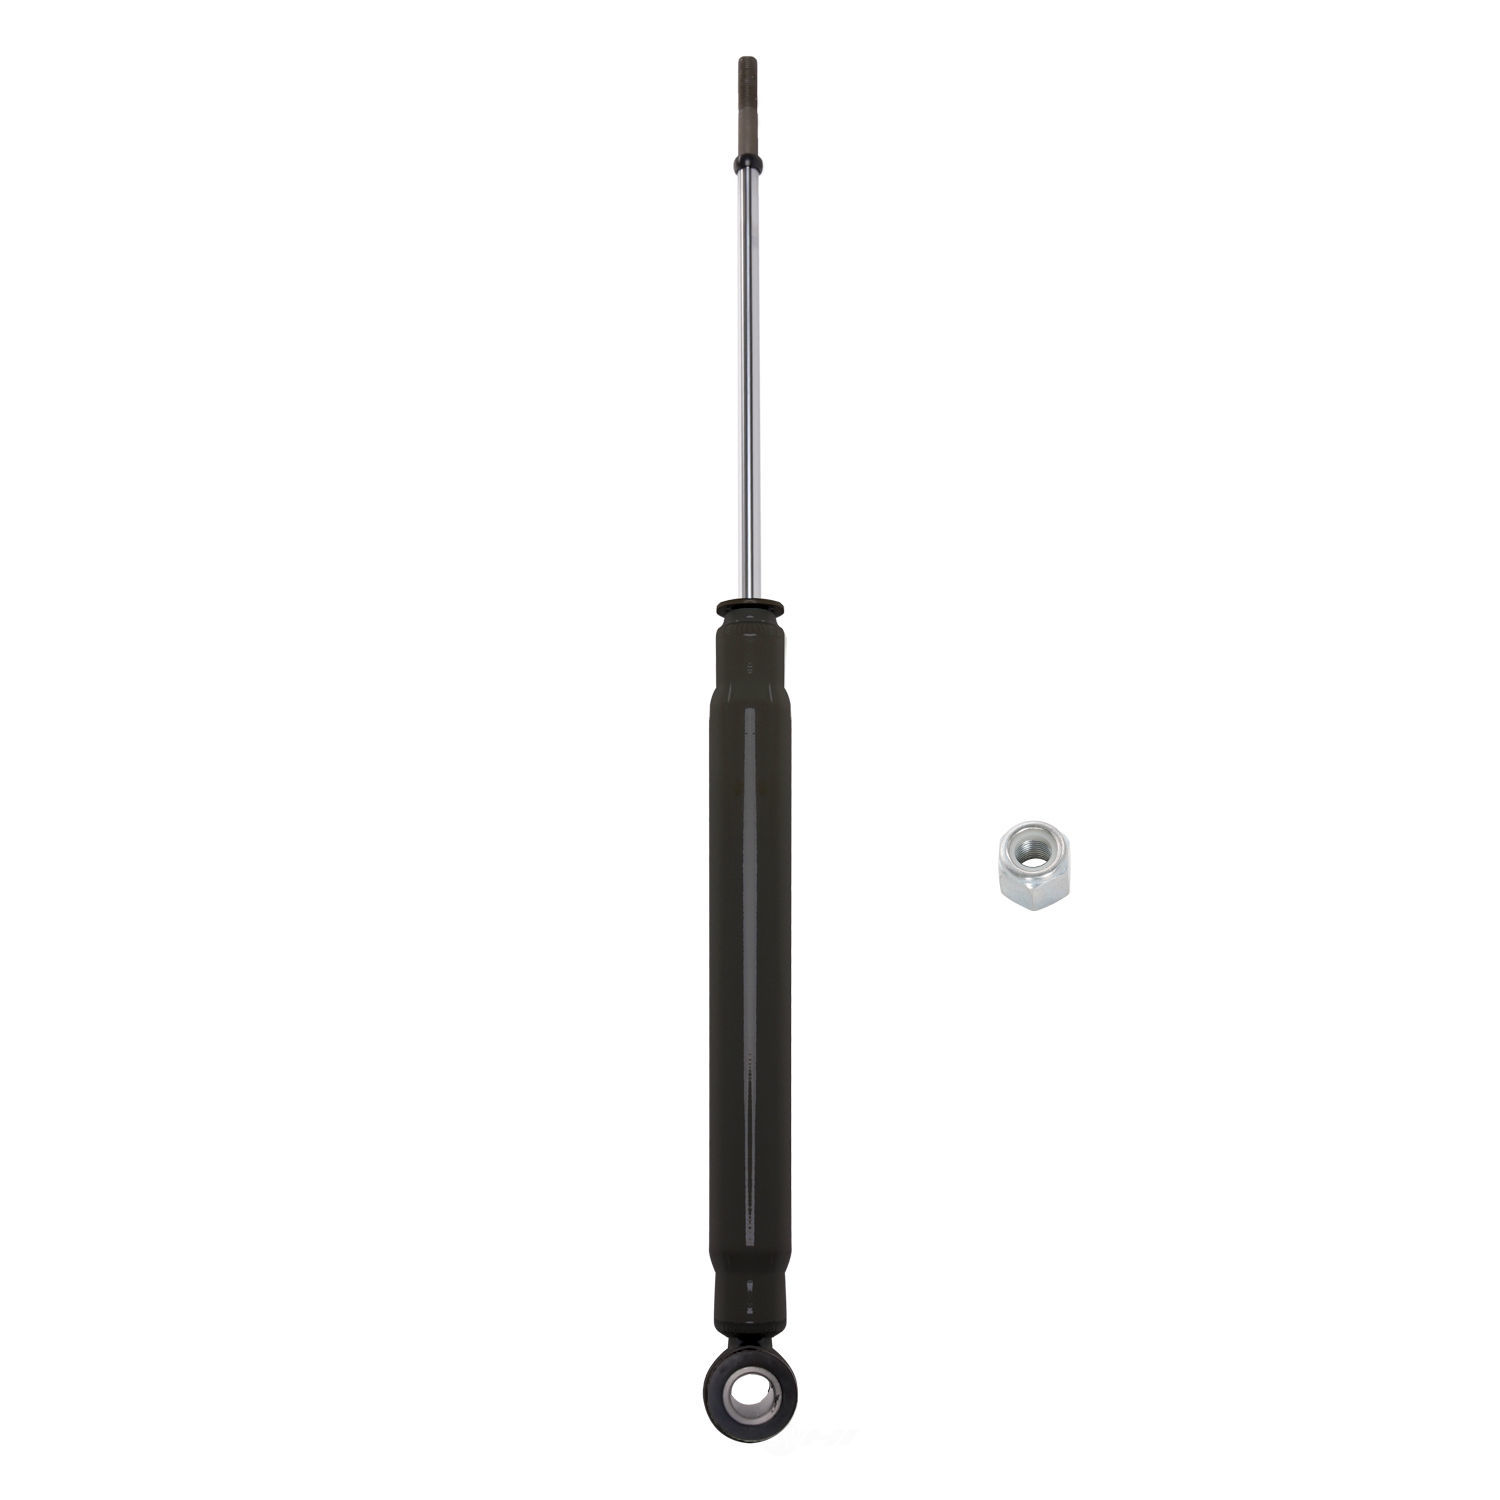 PERFORMANCE RIDE TECHNOLOGY BY ADD - Suspension Strut - P6T 373238